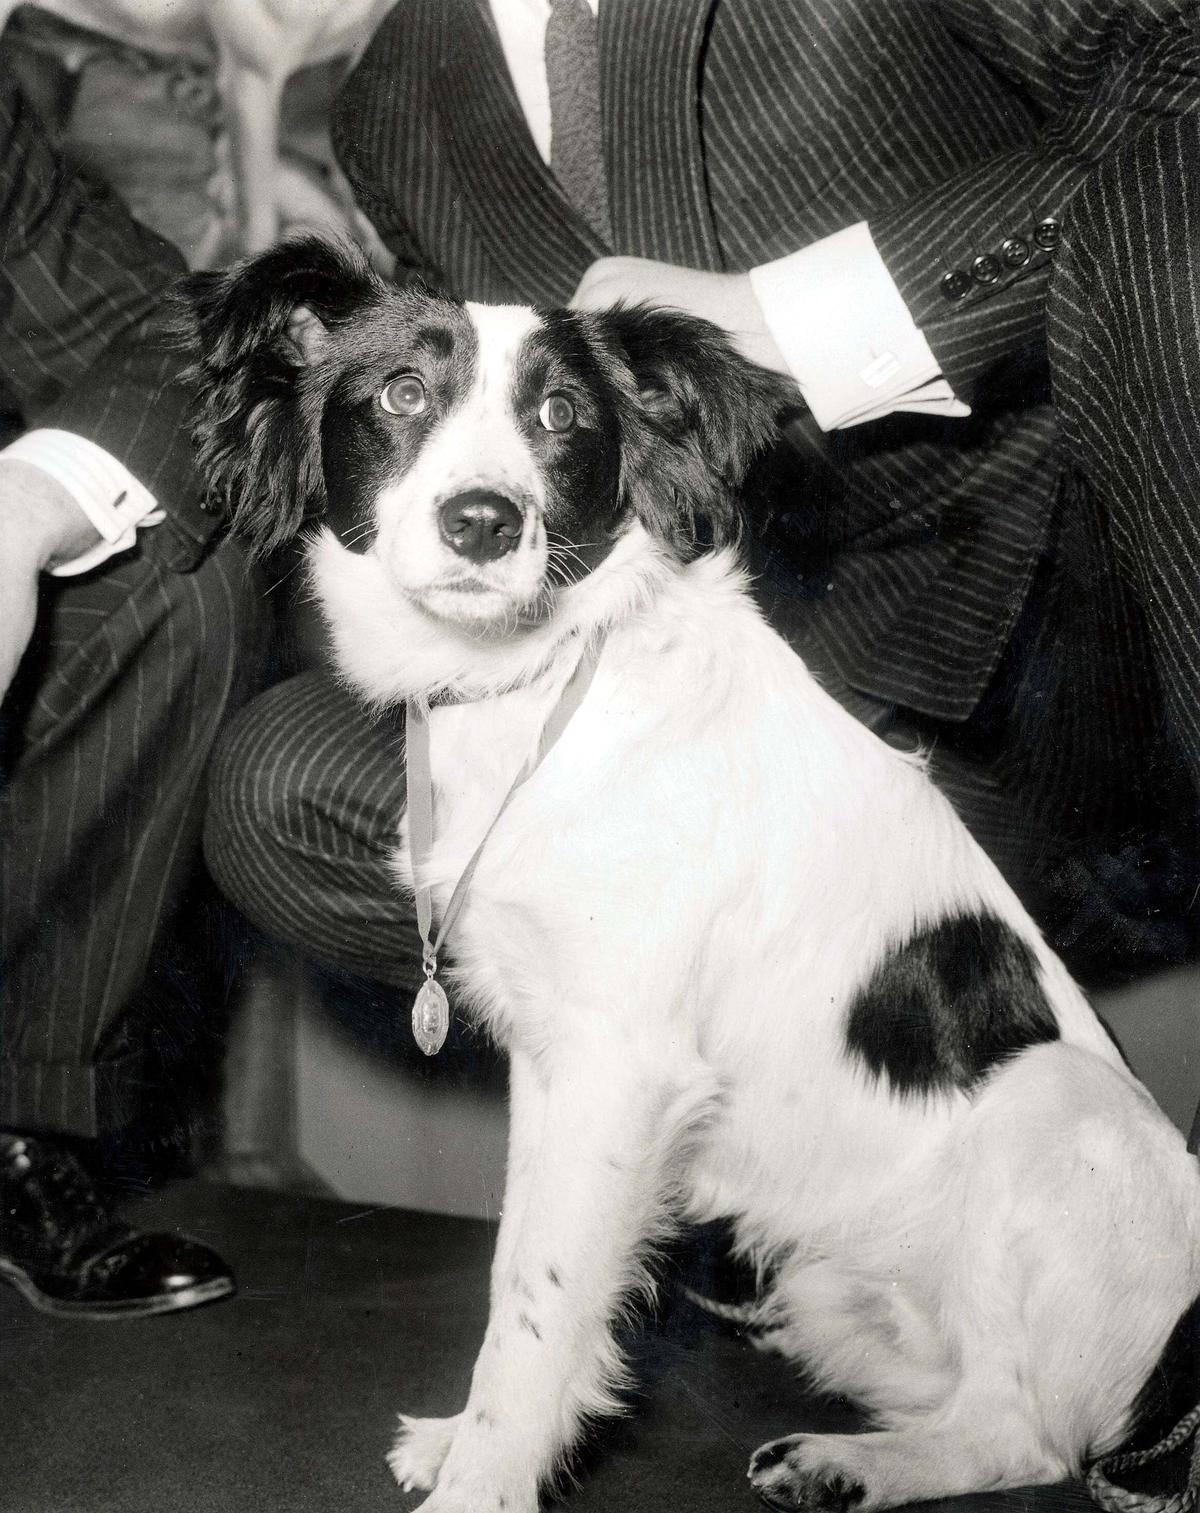 Pickles, the dog that found the World Cup trophy after it was stolen in England ahead of the 1966 World Cup